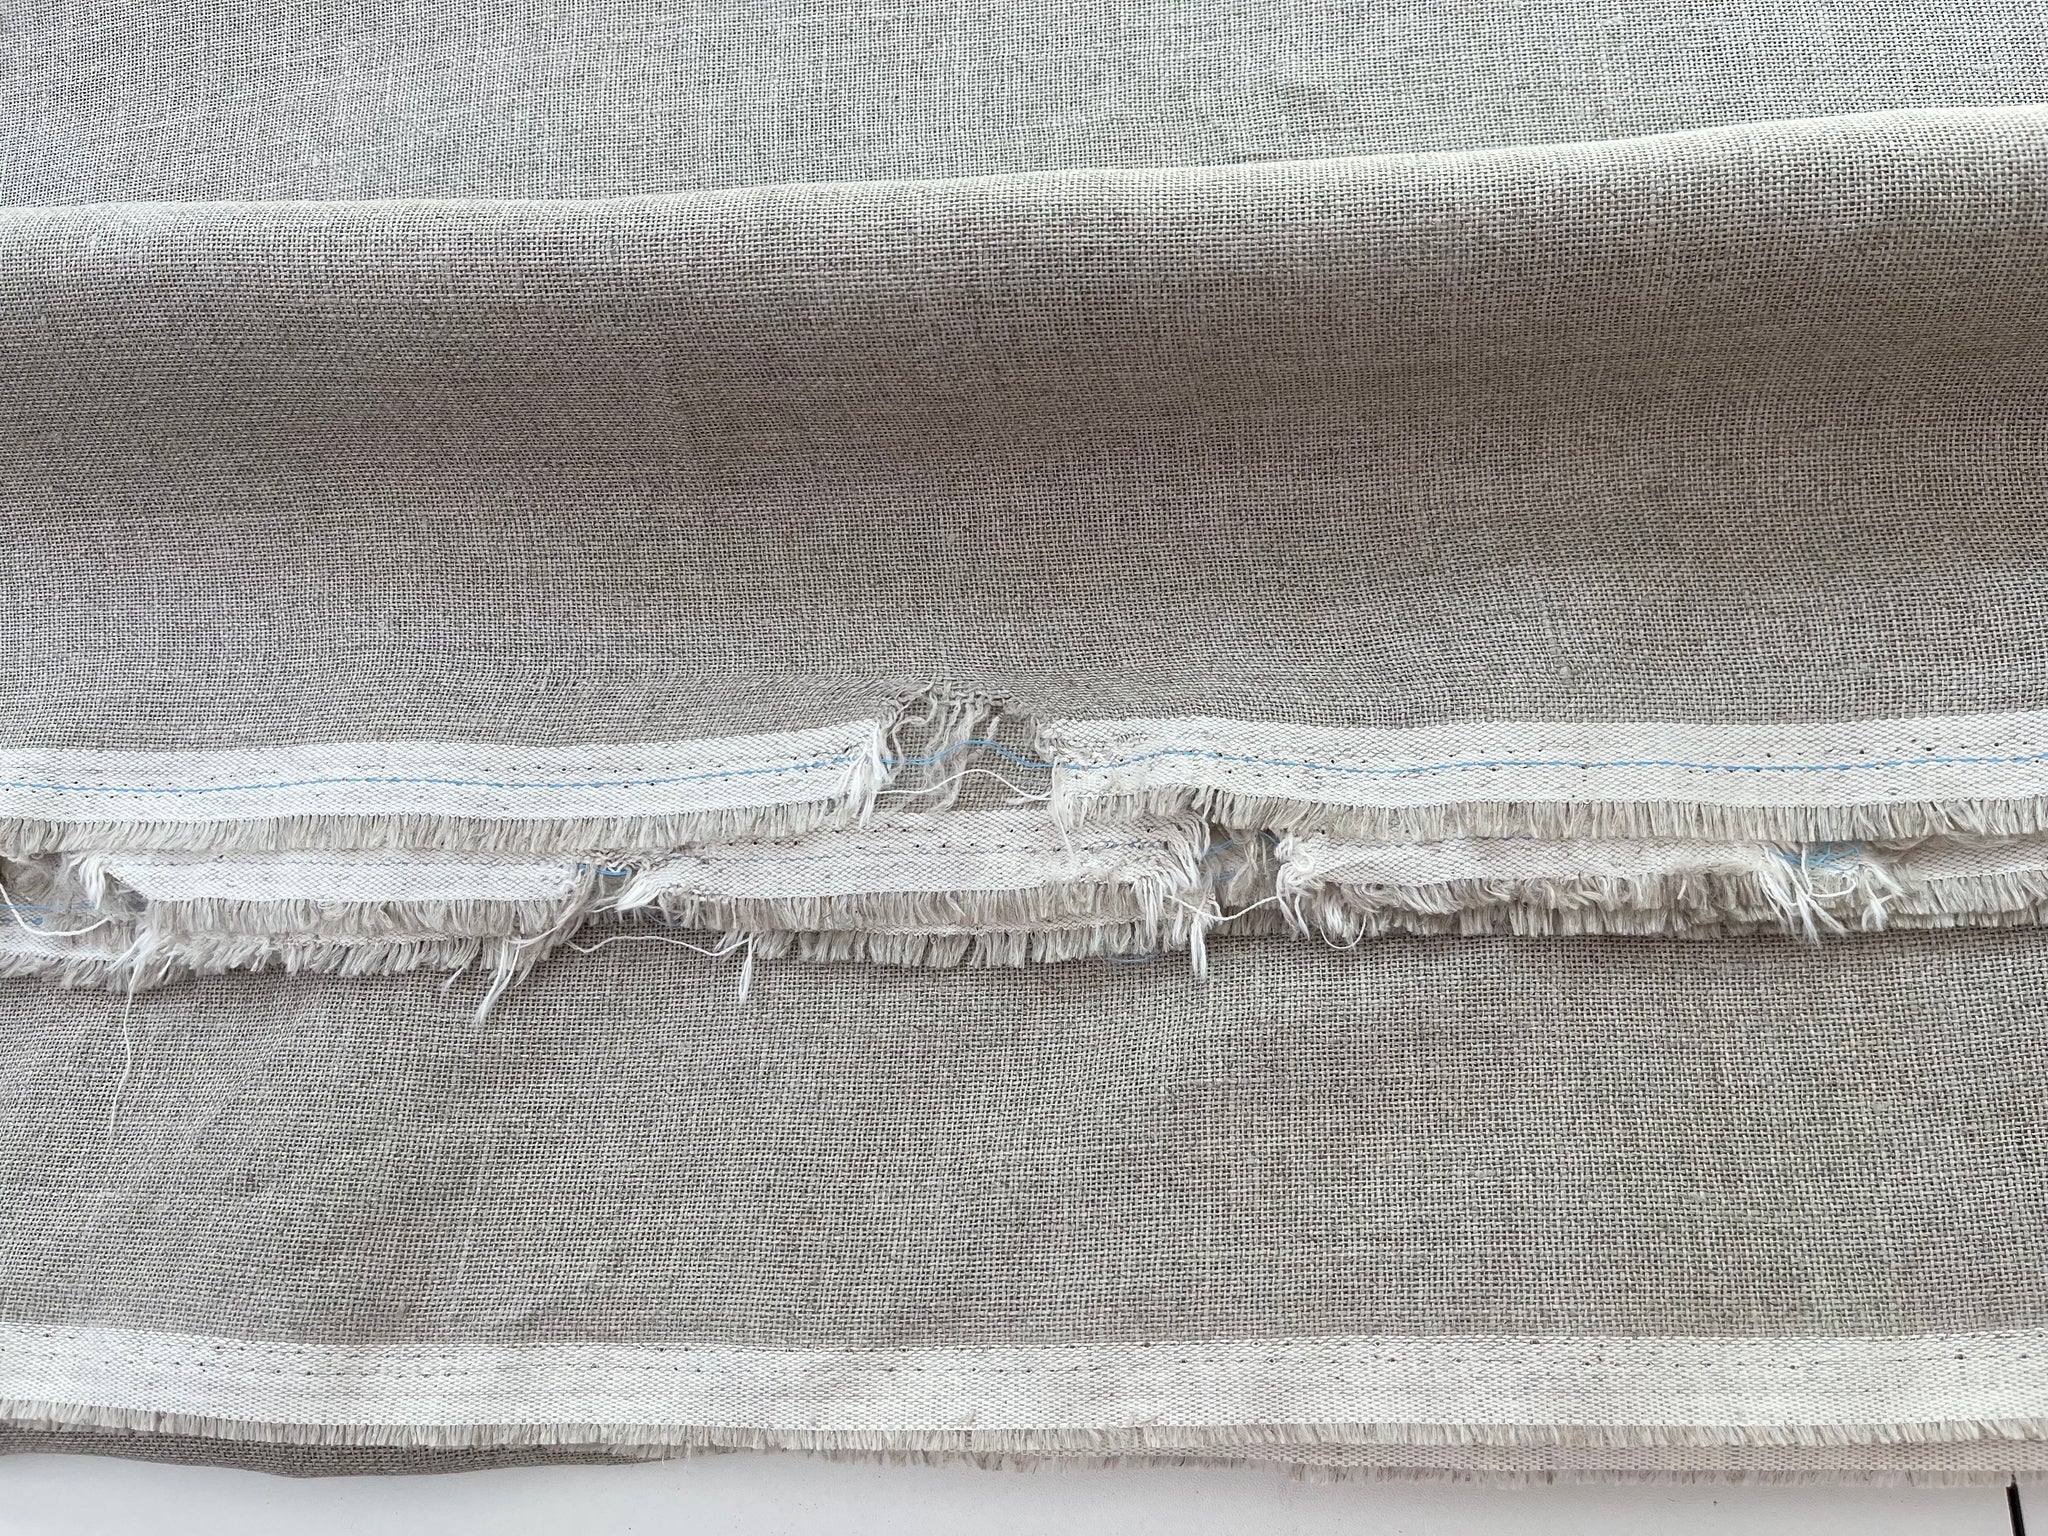 Linen Fabric Remnants - Natural Loose Weave - over 8 yards cut - small rips along selvage